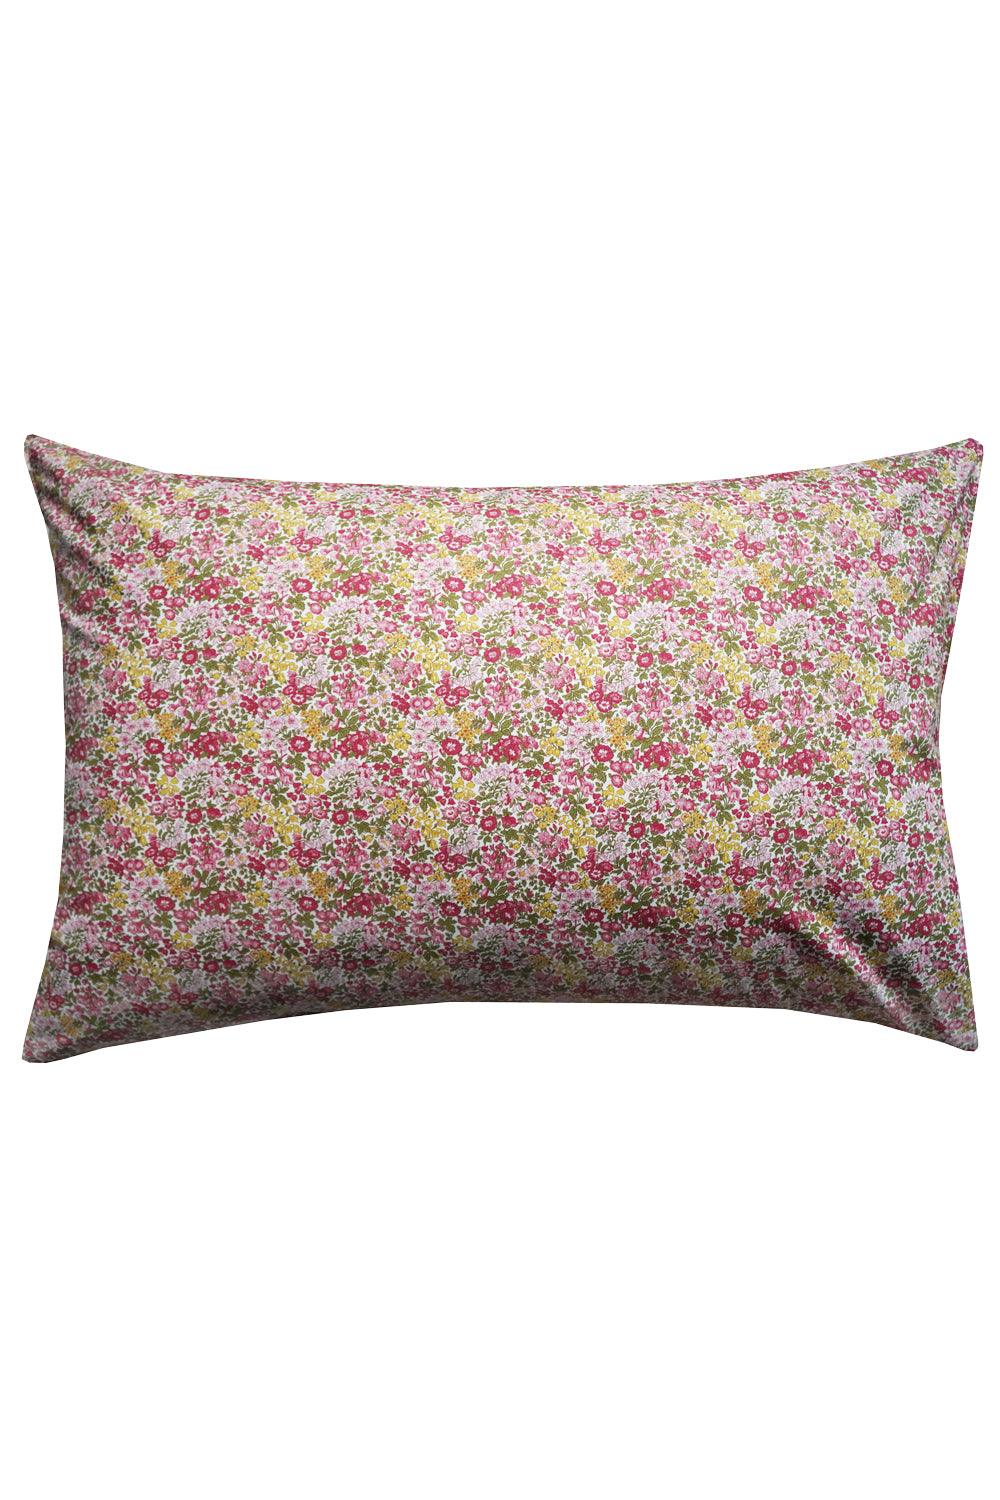 Pillowcase made with Liberty Fabric PENSTEMON - Coco & Wolf